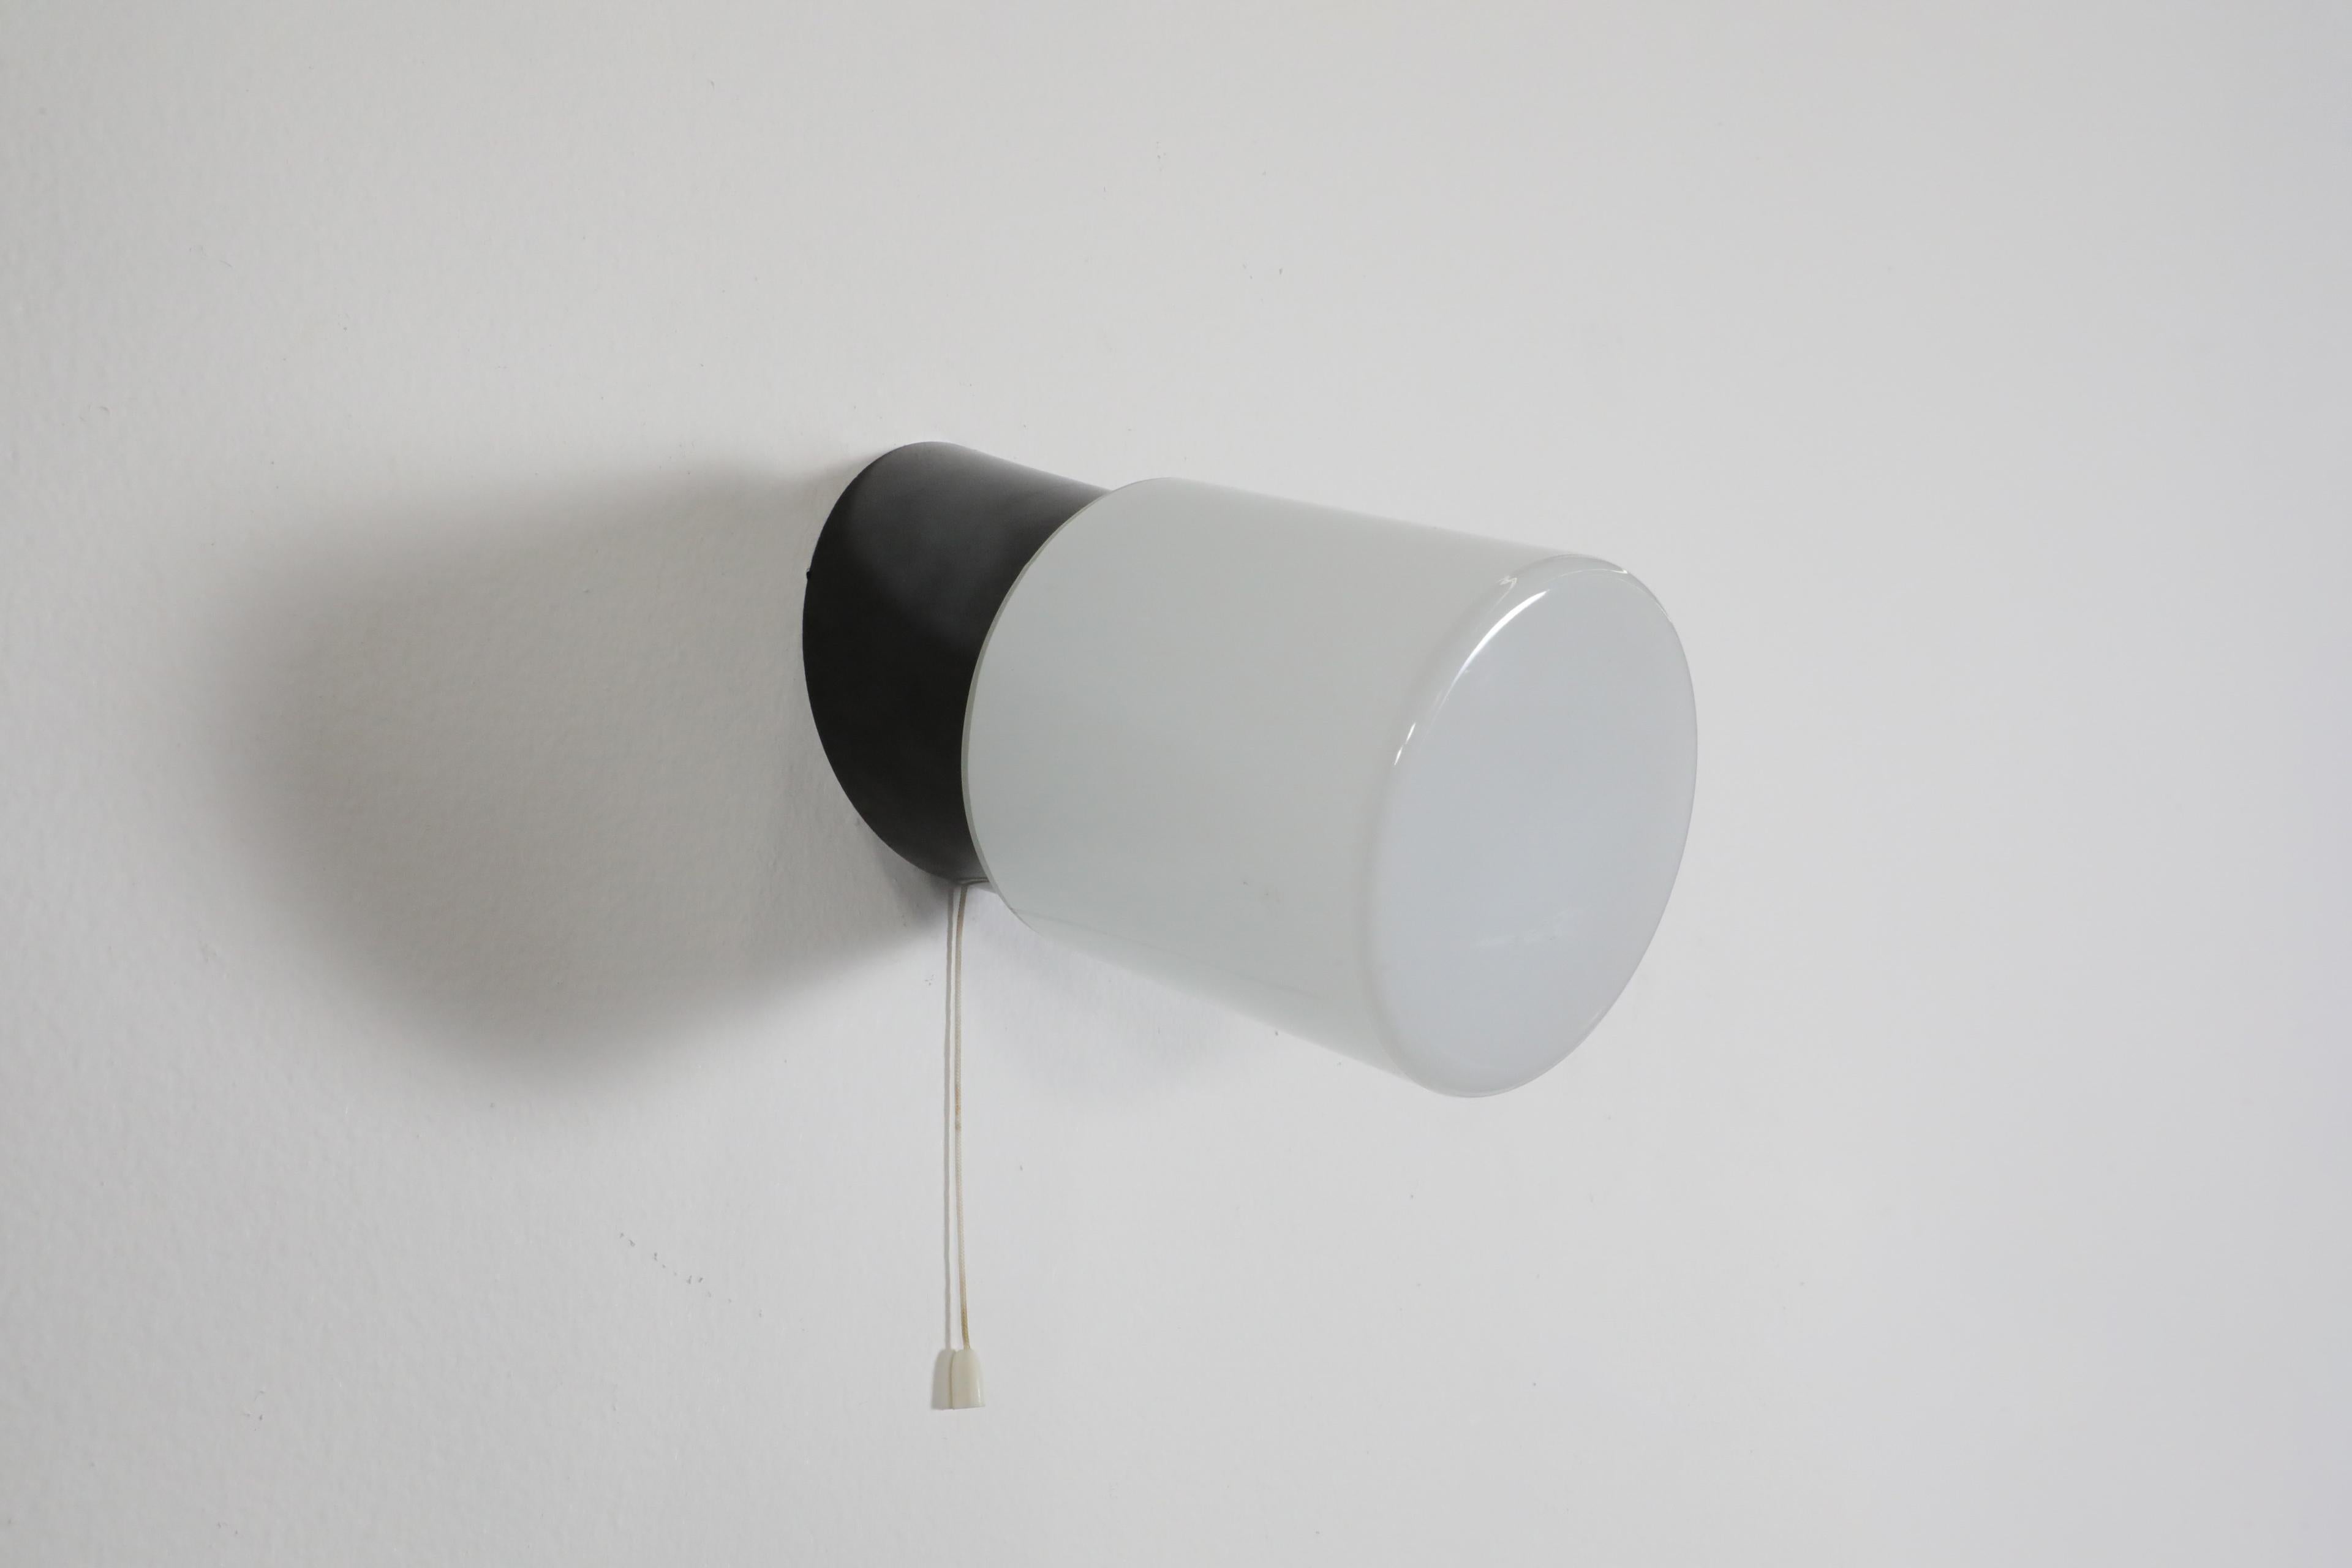 Cylinder Milk Glass Sconce with Black Bakelite Base and Pull String Switch For Sale 5